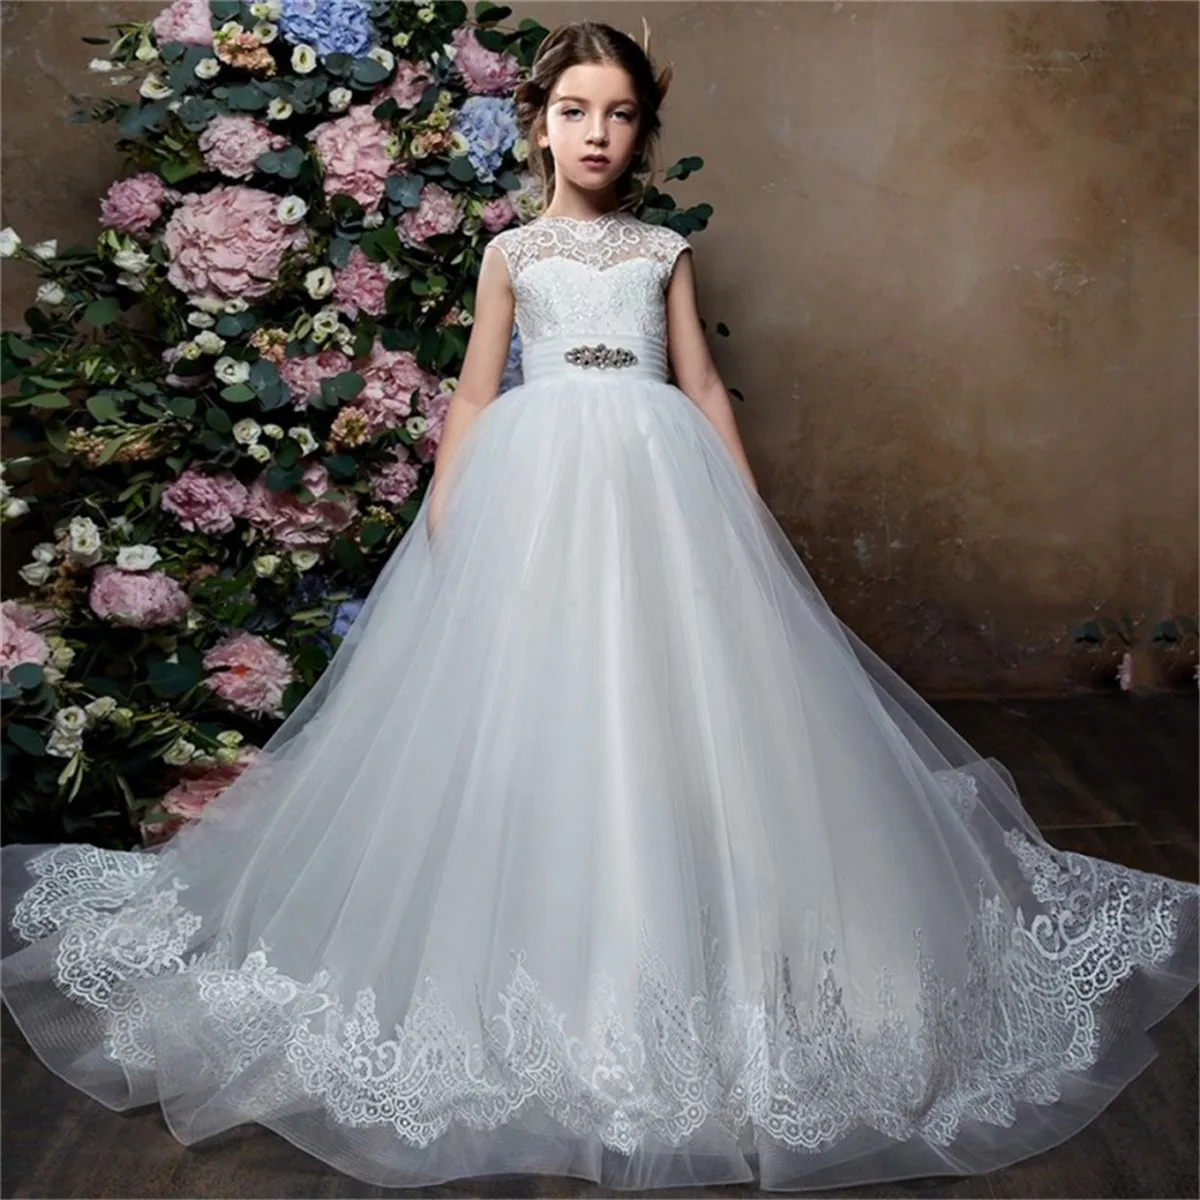 

White Flower Girl Dress Fluffy Layered Tulle Lace Applique Wedding Elegant Flower Child's First Eucharistic Birthday Party Dress